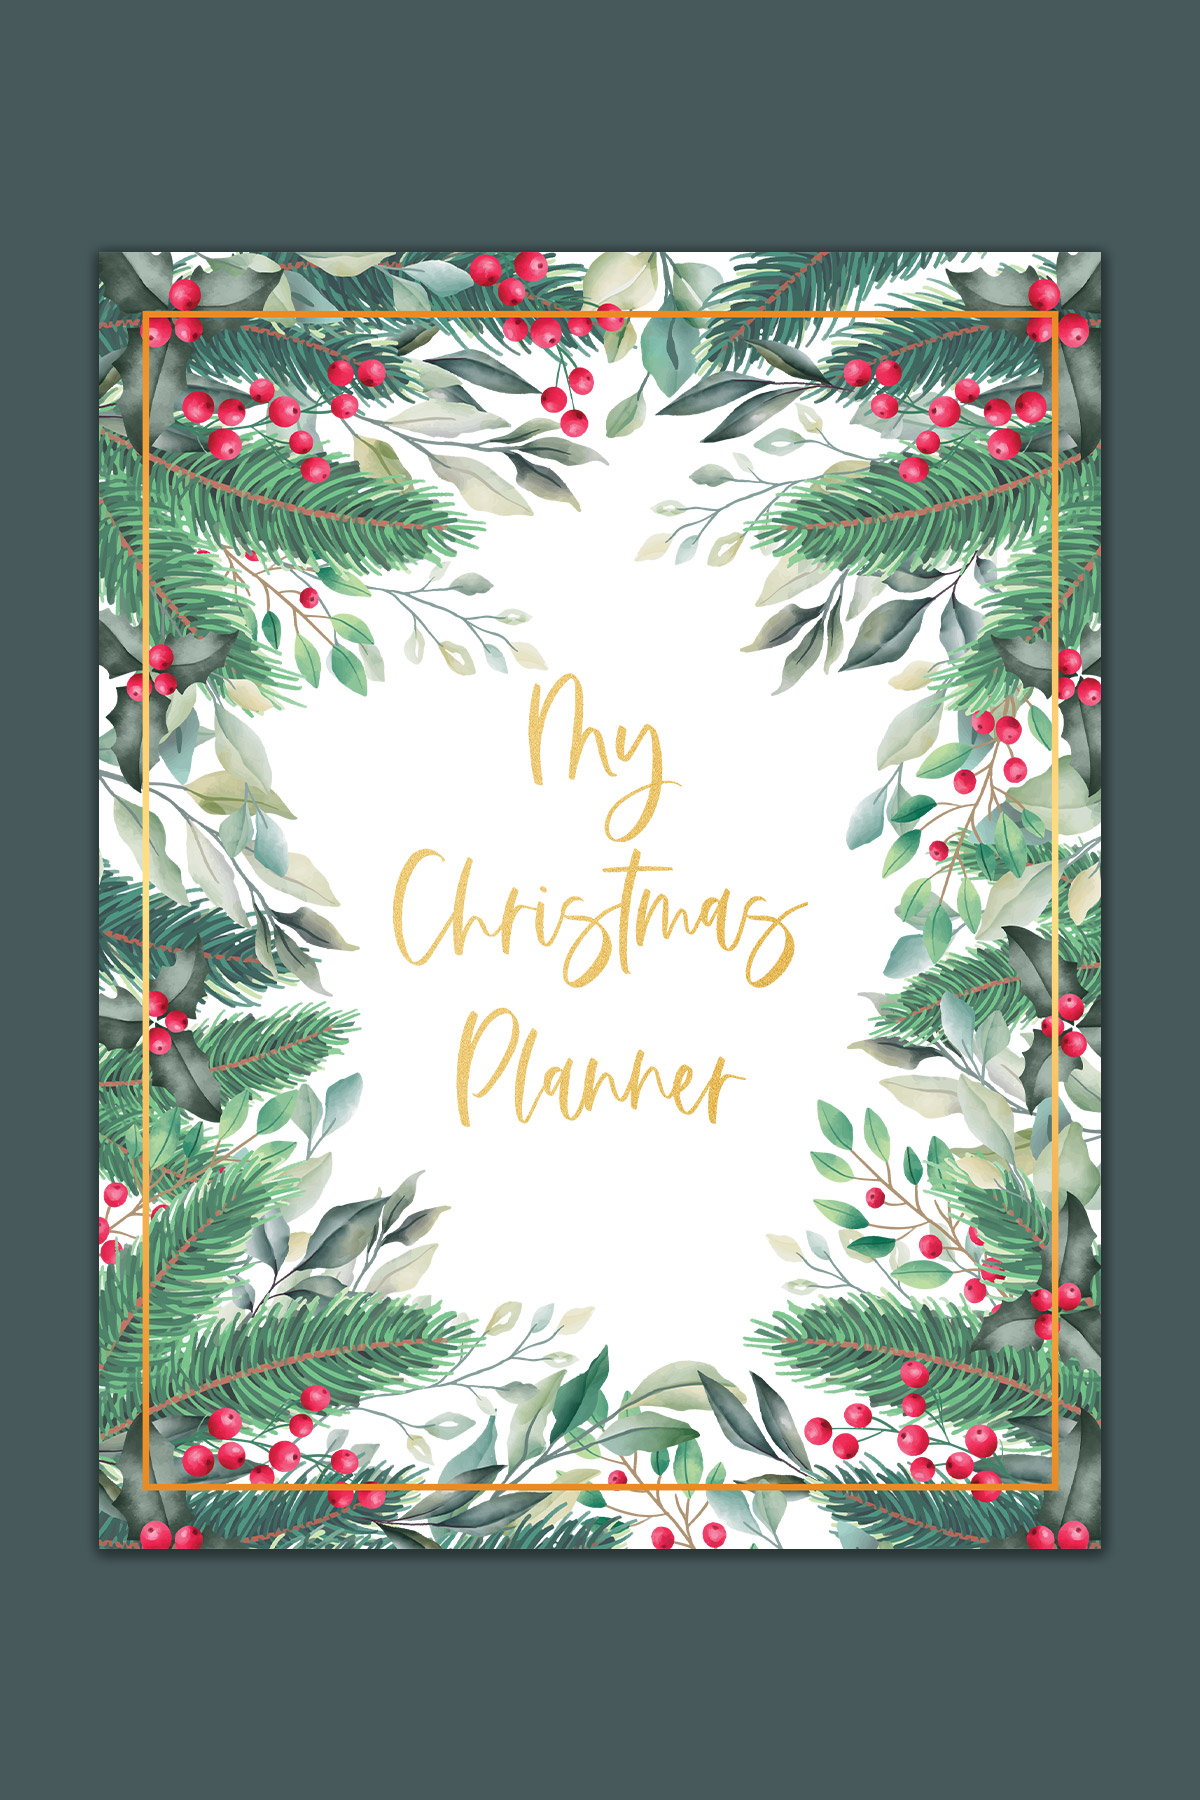 This image shows the free cover that is part of the printable Christmas planner files you can get at the end of this blog post.